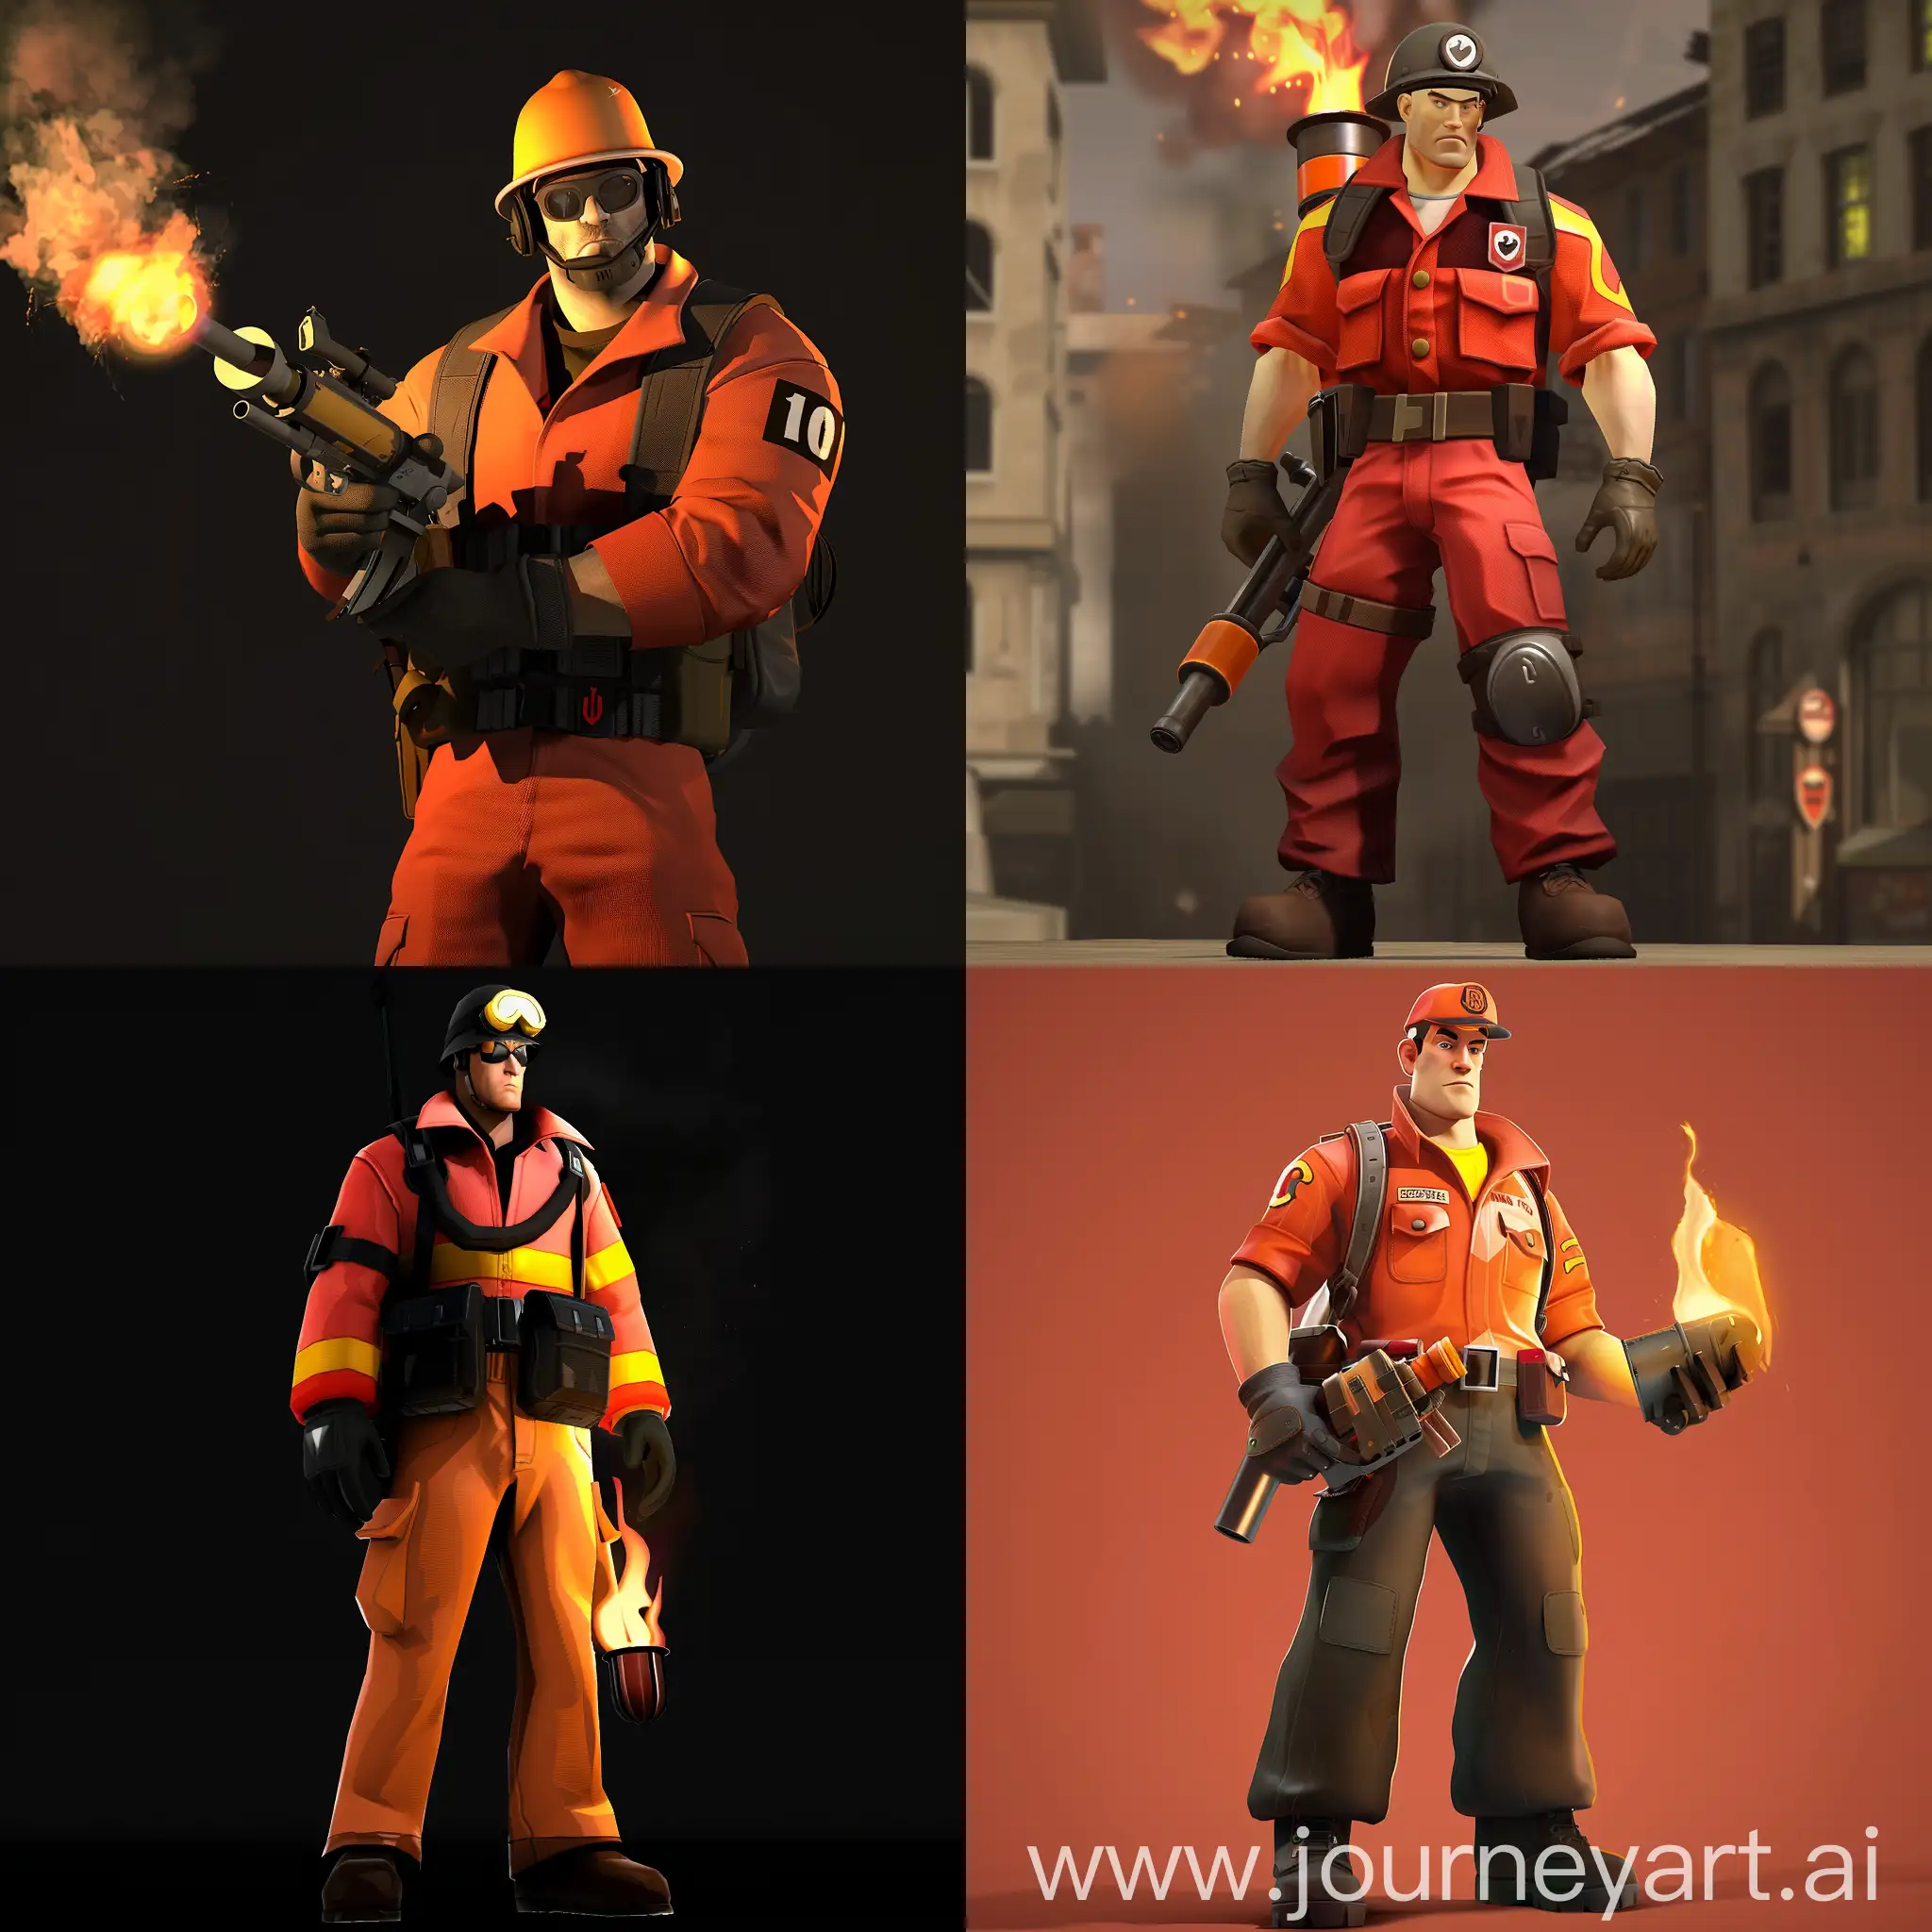 Pyro-Character-from-Team-Fortress-2-in-Fiery-Action